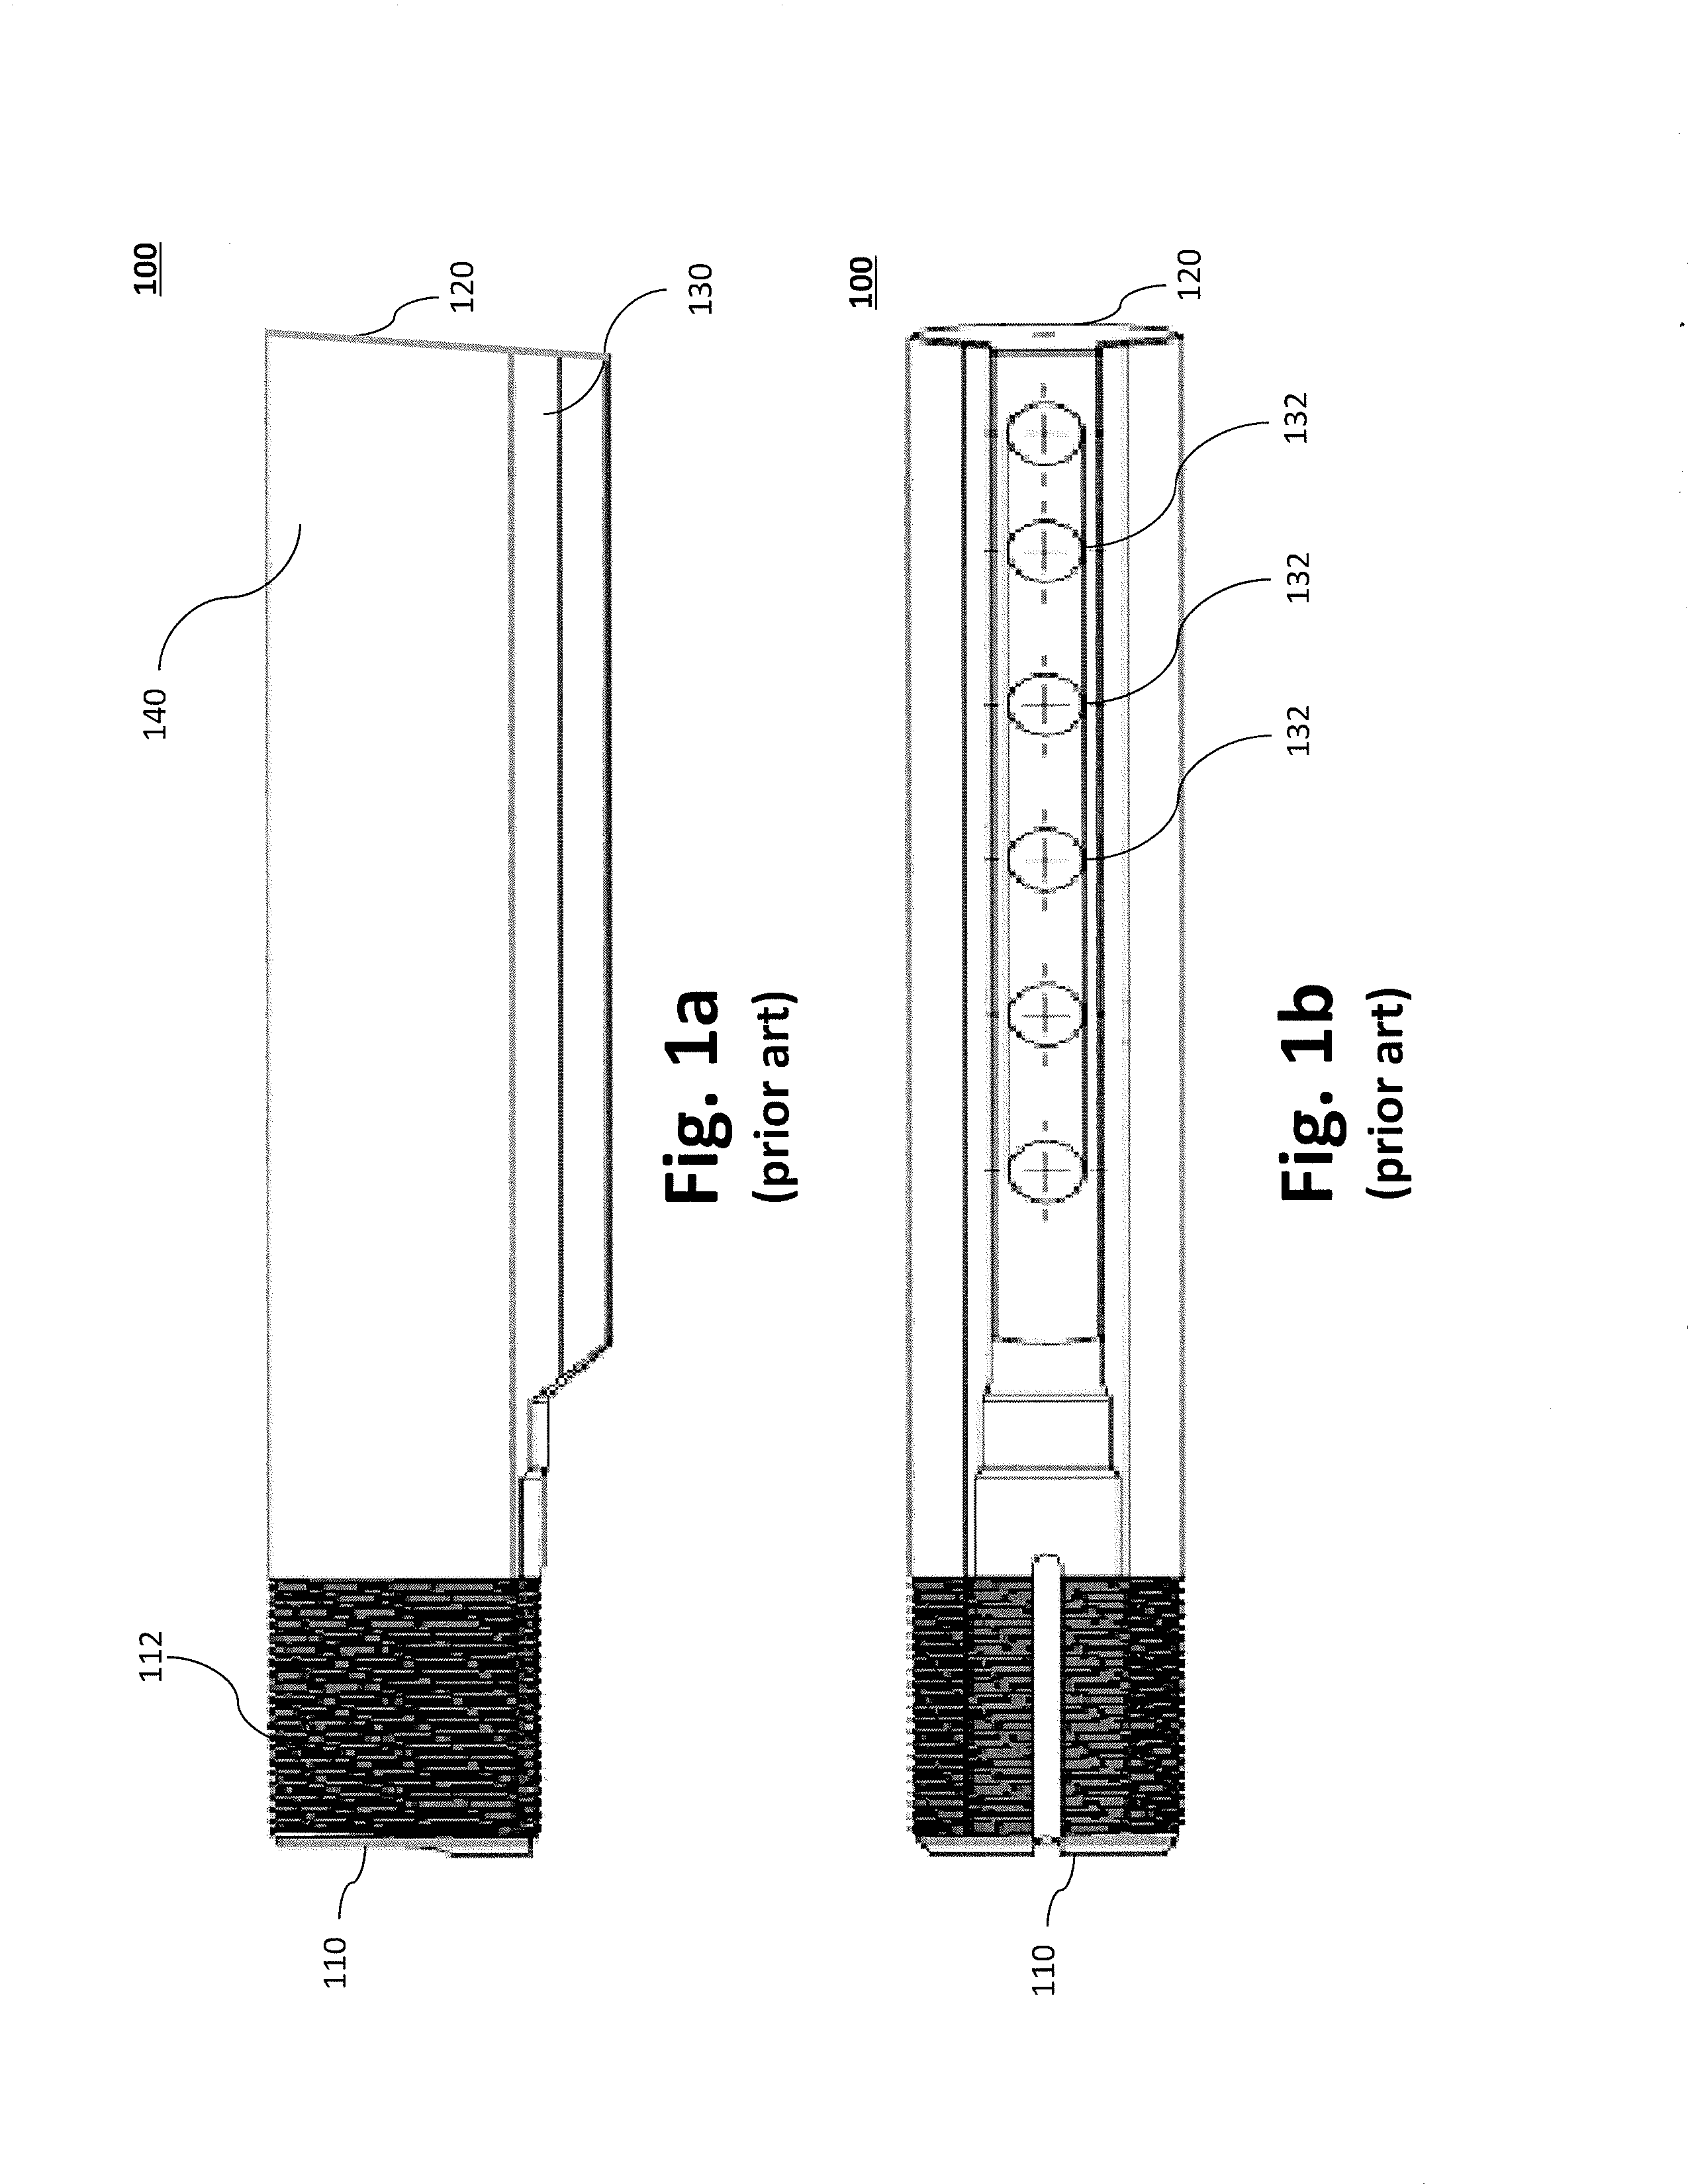 Recoil mitigation and buttstock floating system, method, and apparatus